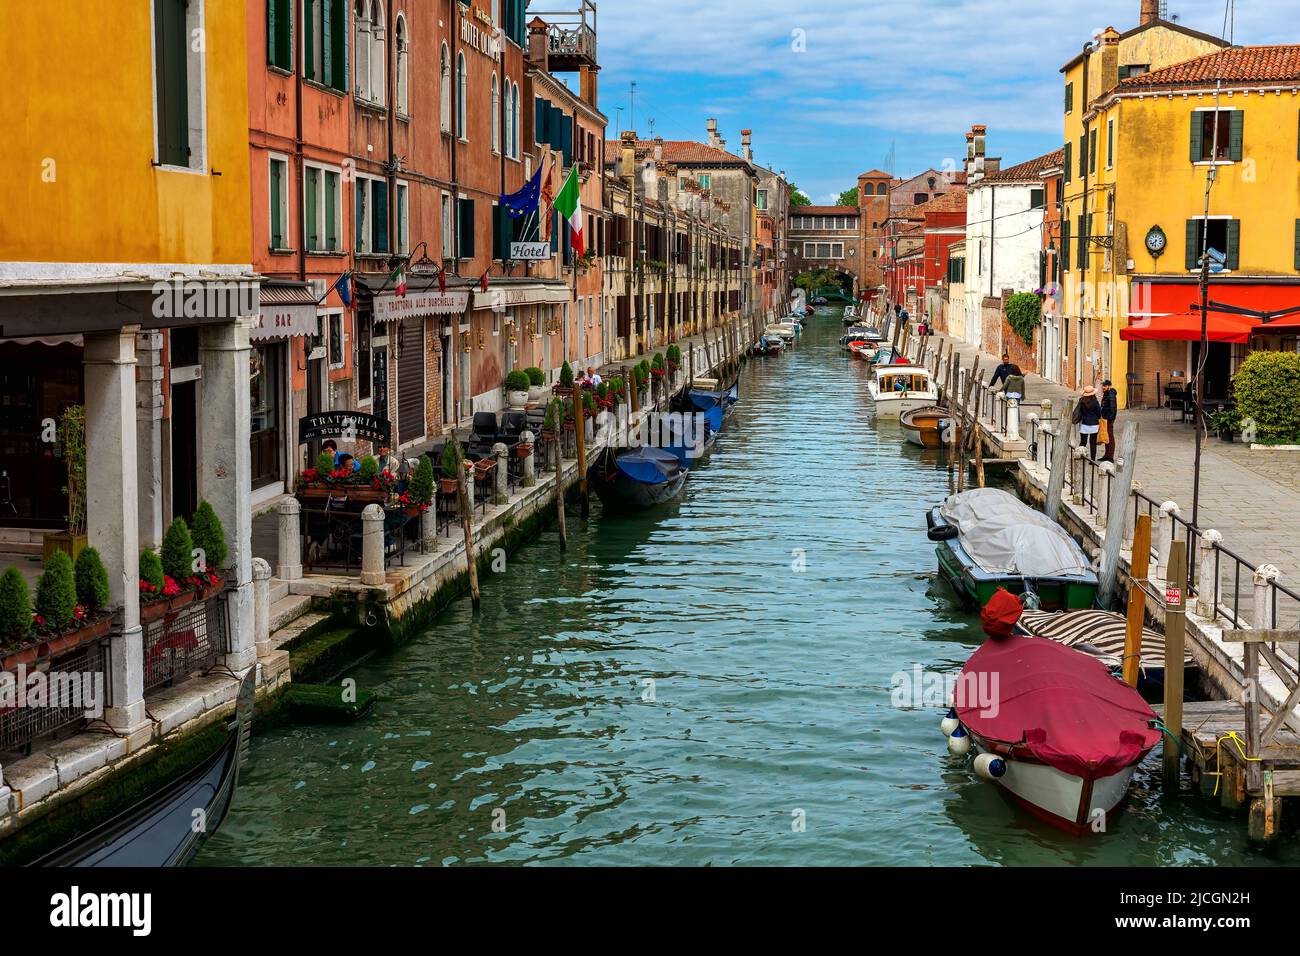 View of boats on narrow canal along old colorful houses and typical street in Venice, Italy. Stock Photo